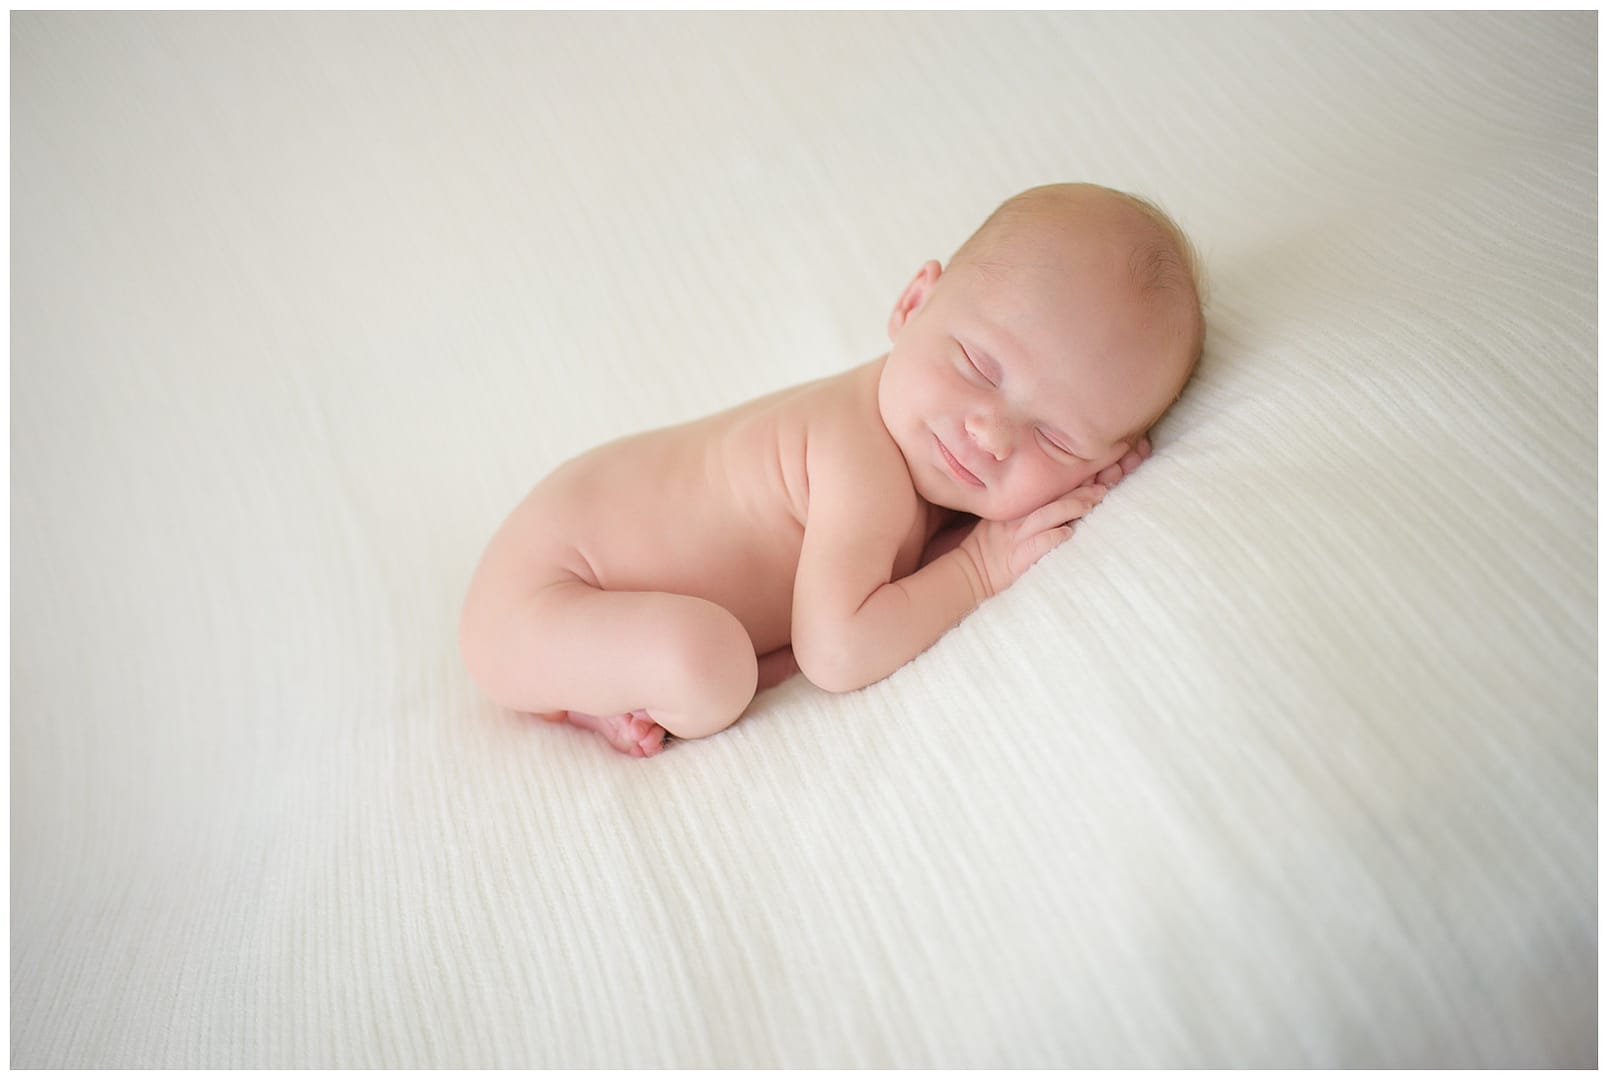 Smiling baby in studio. Photos by Tiffany Hix Photography.